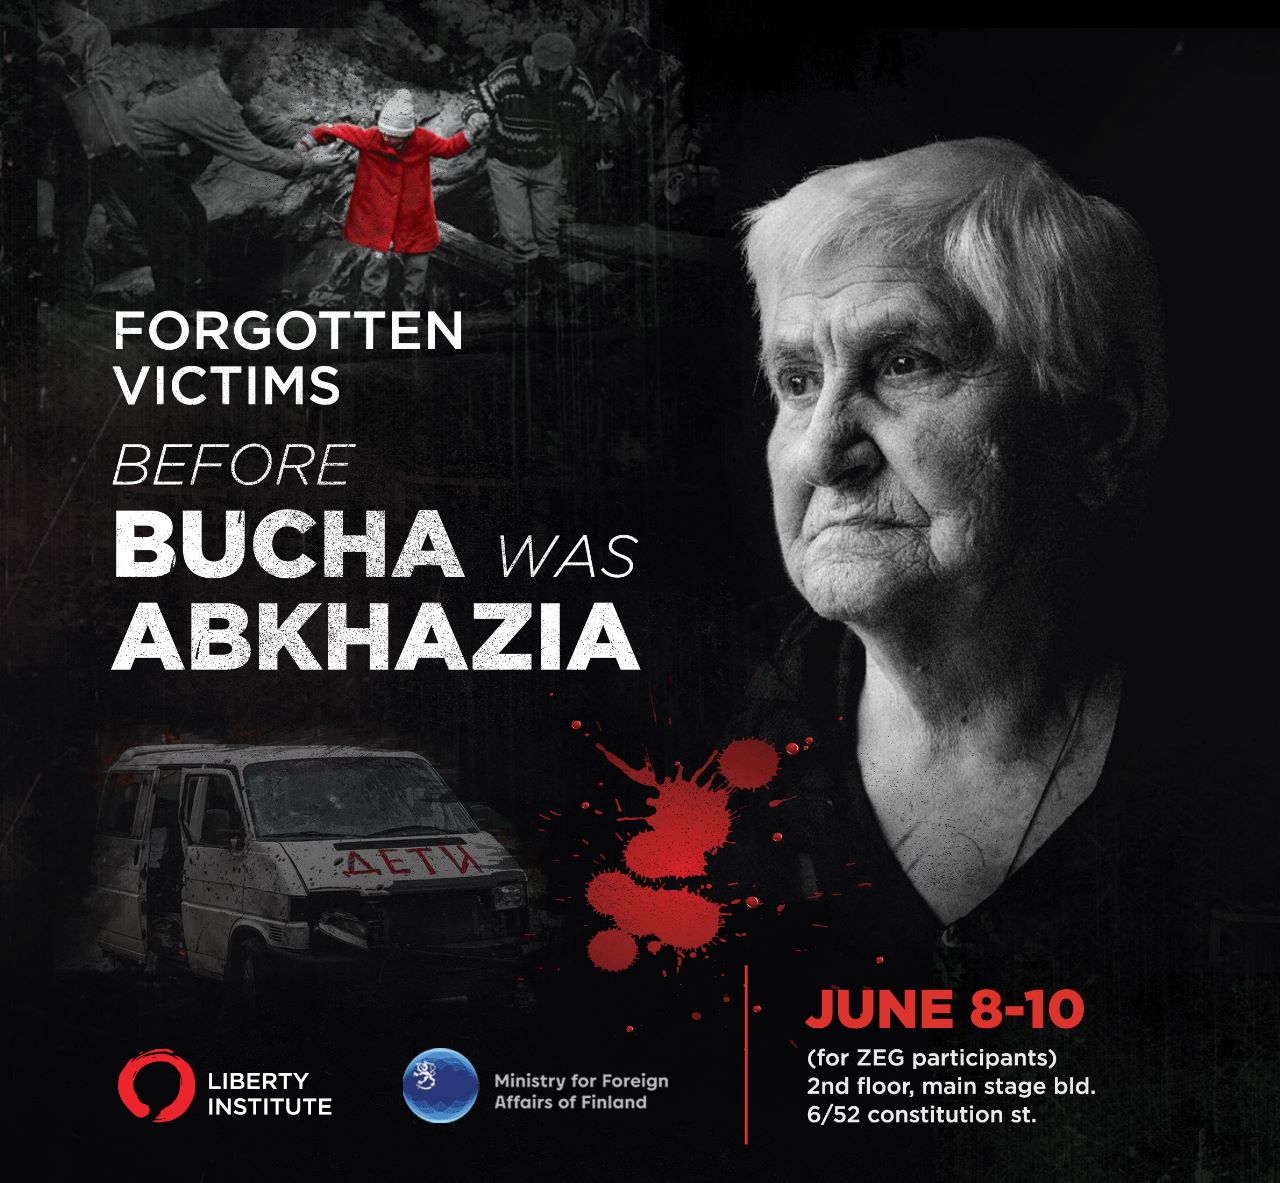 On June 8-10, the Liberty Institute organized an English interactive exhibition - "Forgotten victims: Before Bucha was Abkhazia "